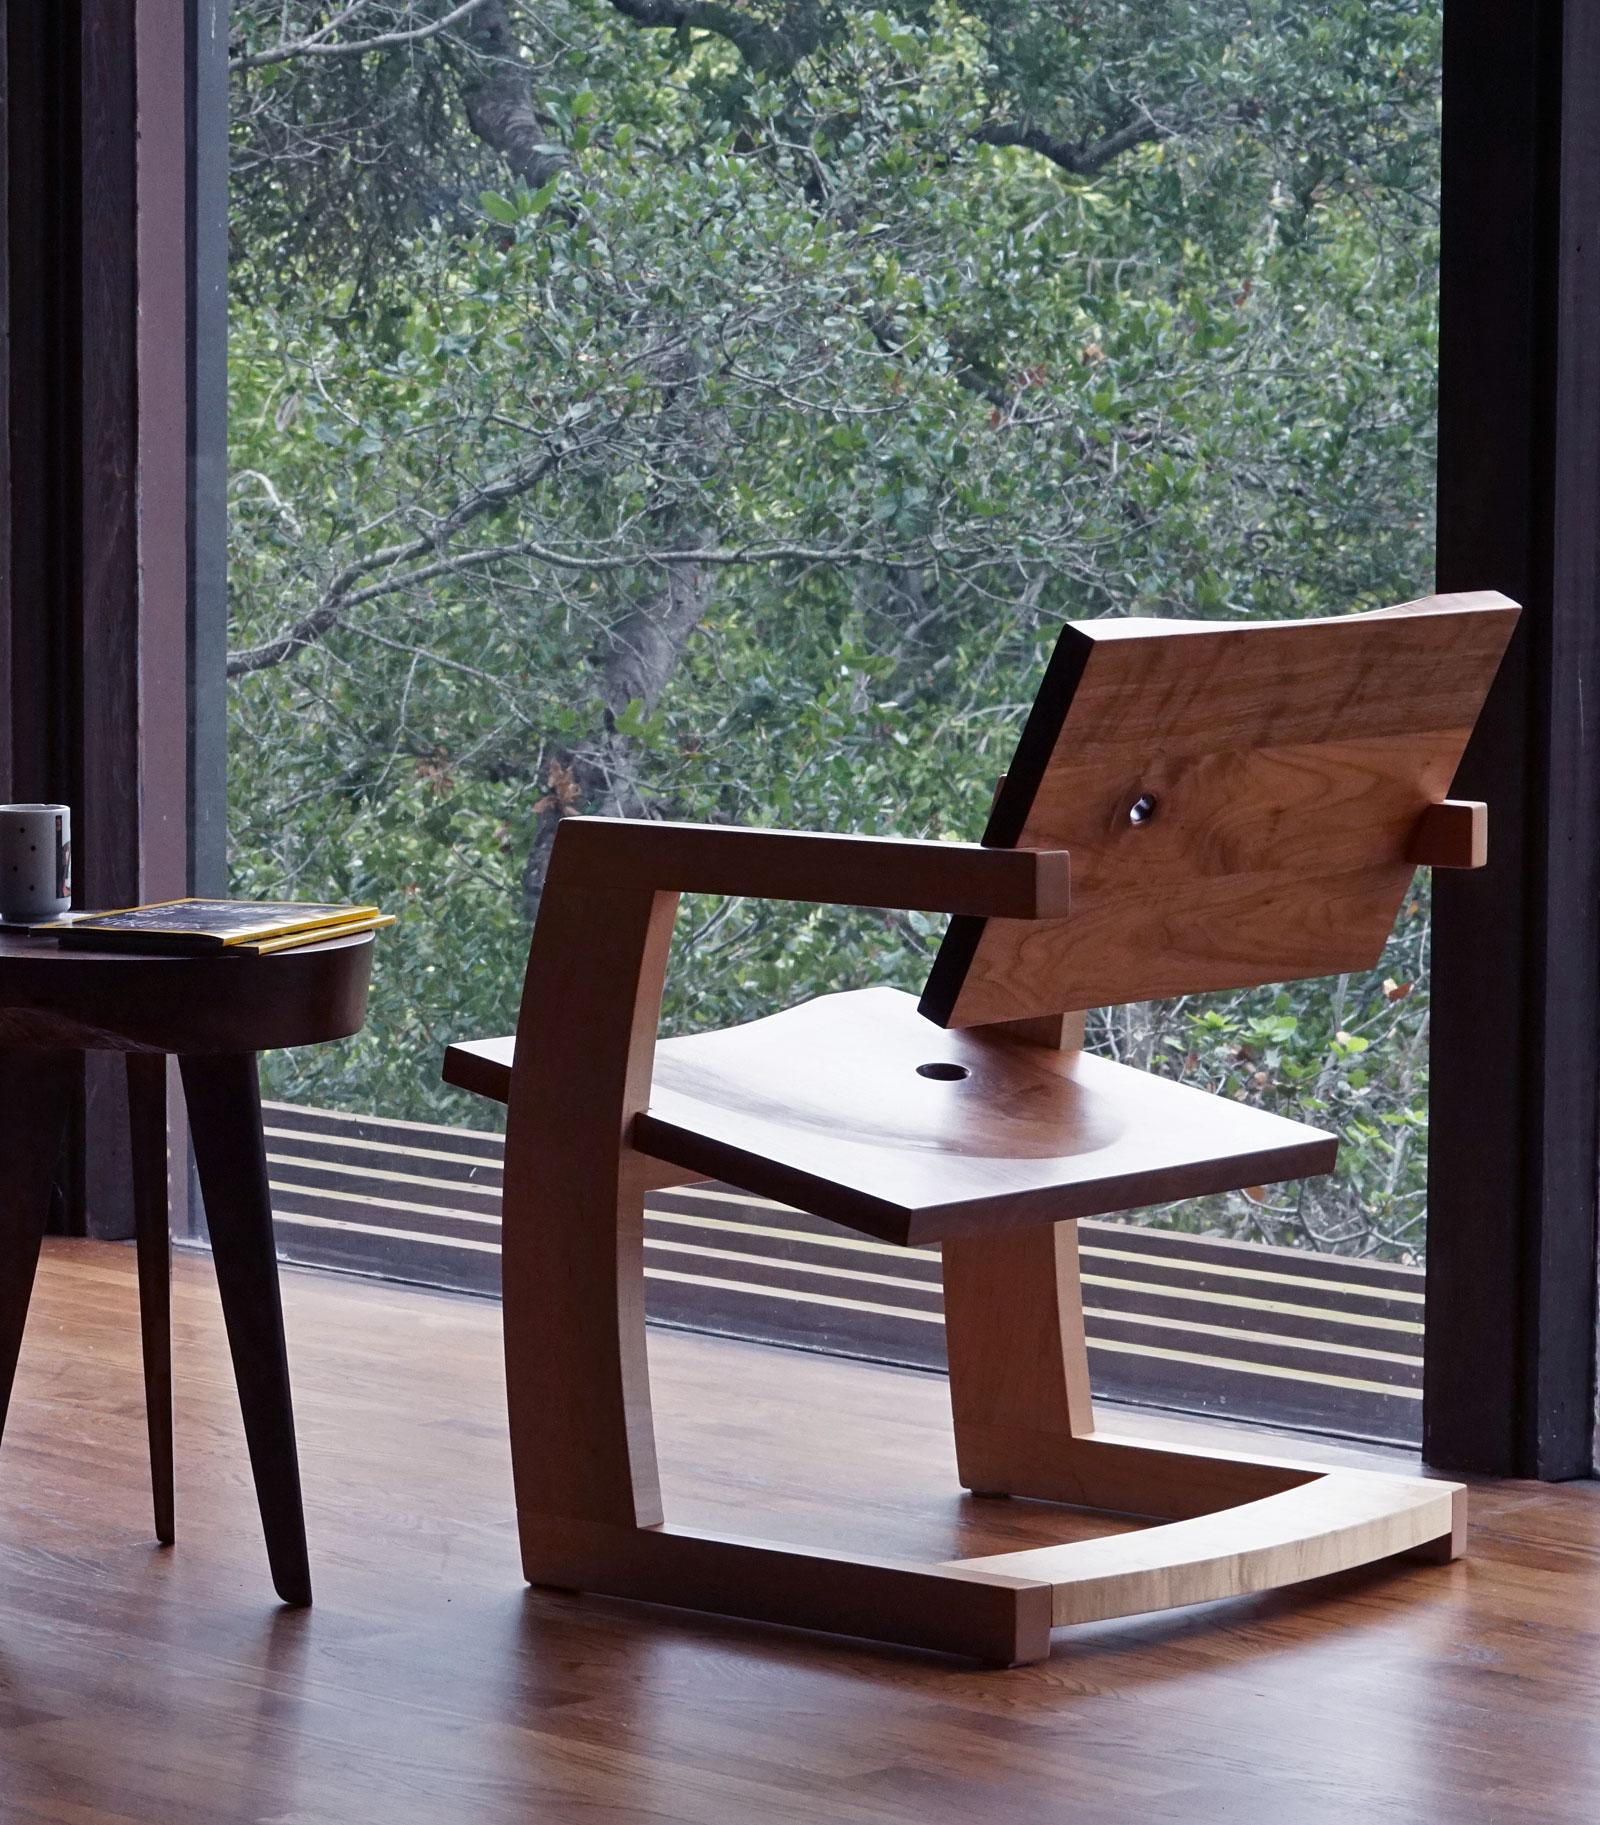 The Palo Alto chair features two contoured walnut planes that intersect a rigid maple frame. The angles of the cantilevered seat and back offer a perfect reclining position for reading, socializing, or simply contemplating the smoothness of the